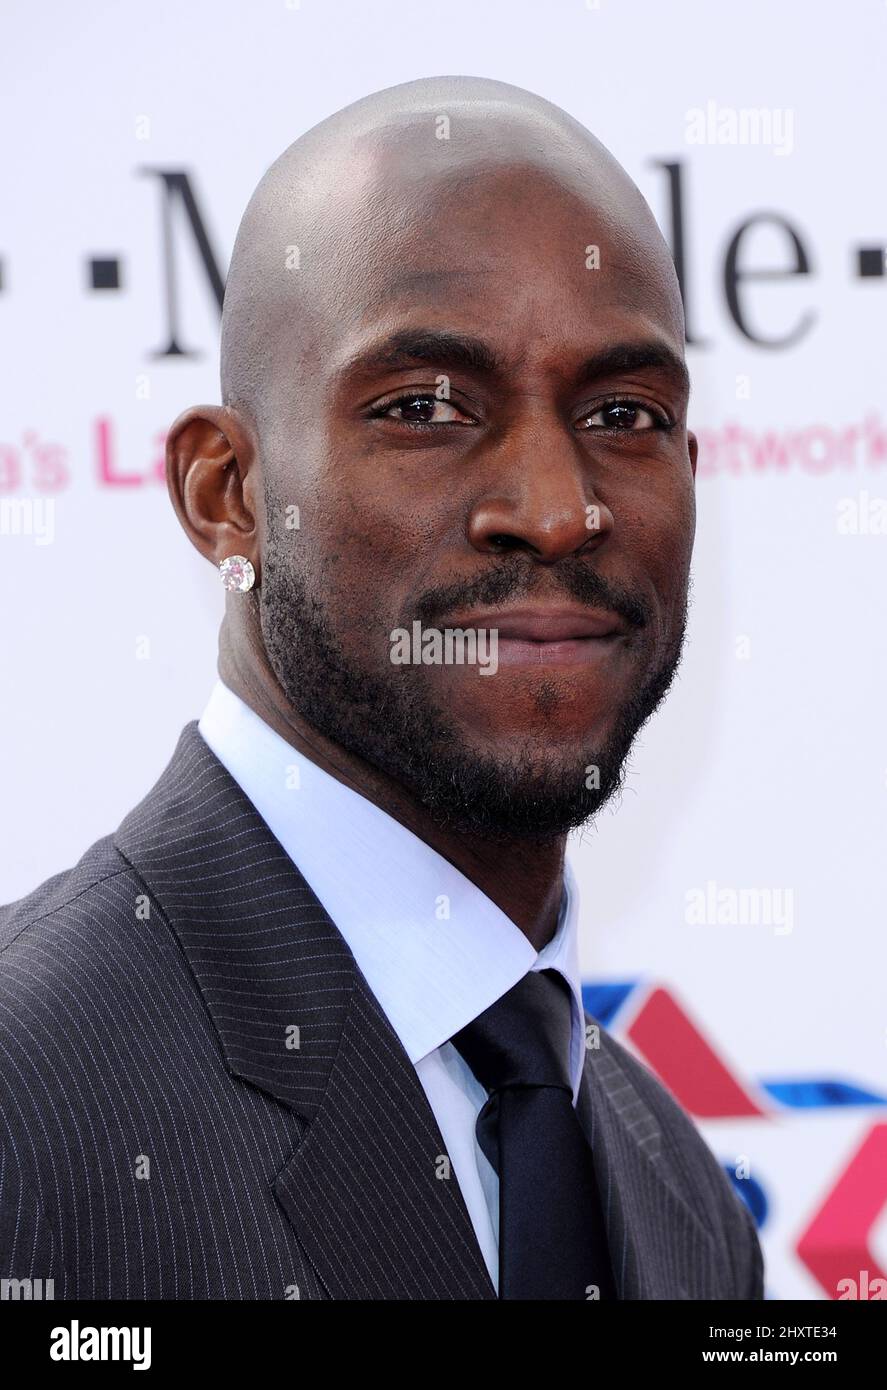 Kevin Garnett at the 2011 T-Mobile NBA All-Star Game, held at LA Live, Los Angeles. Stock Photo